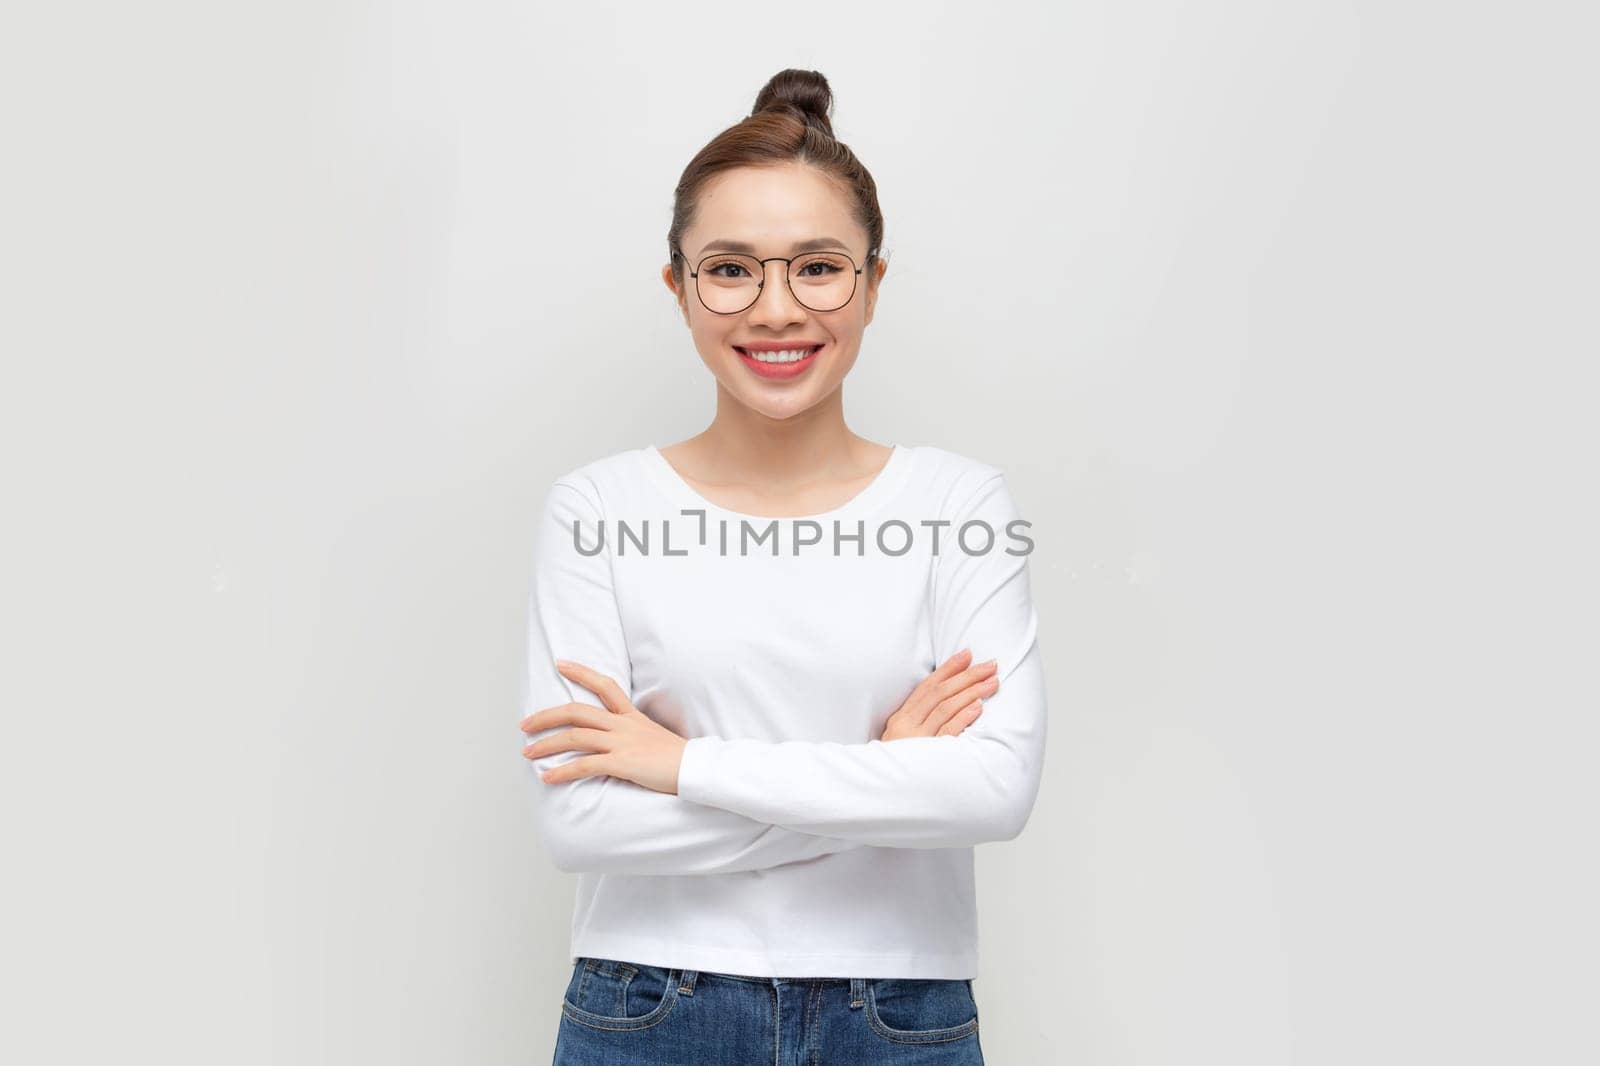 A cheerful woman student in white t-shirt, smiling confident and cheerful with arms folded